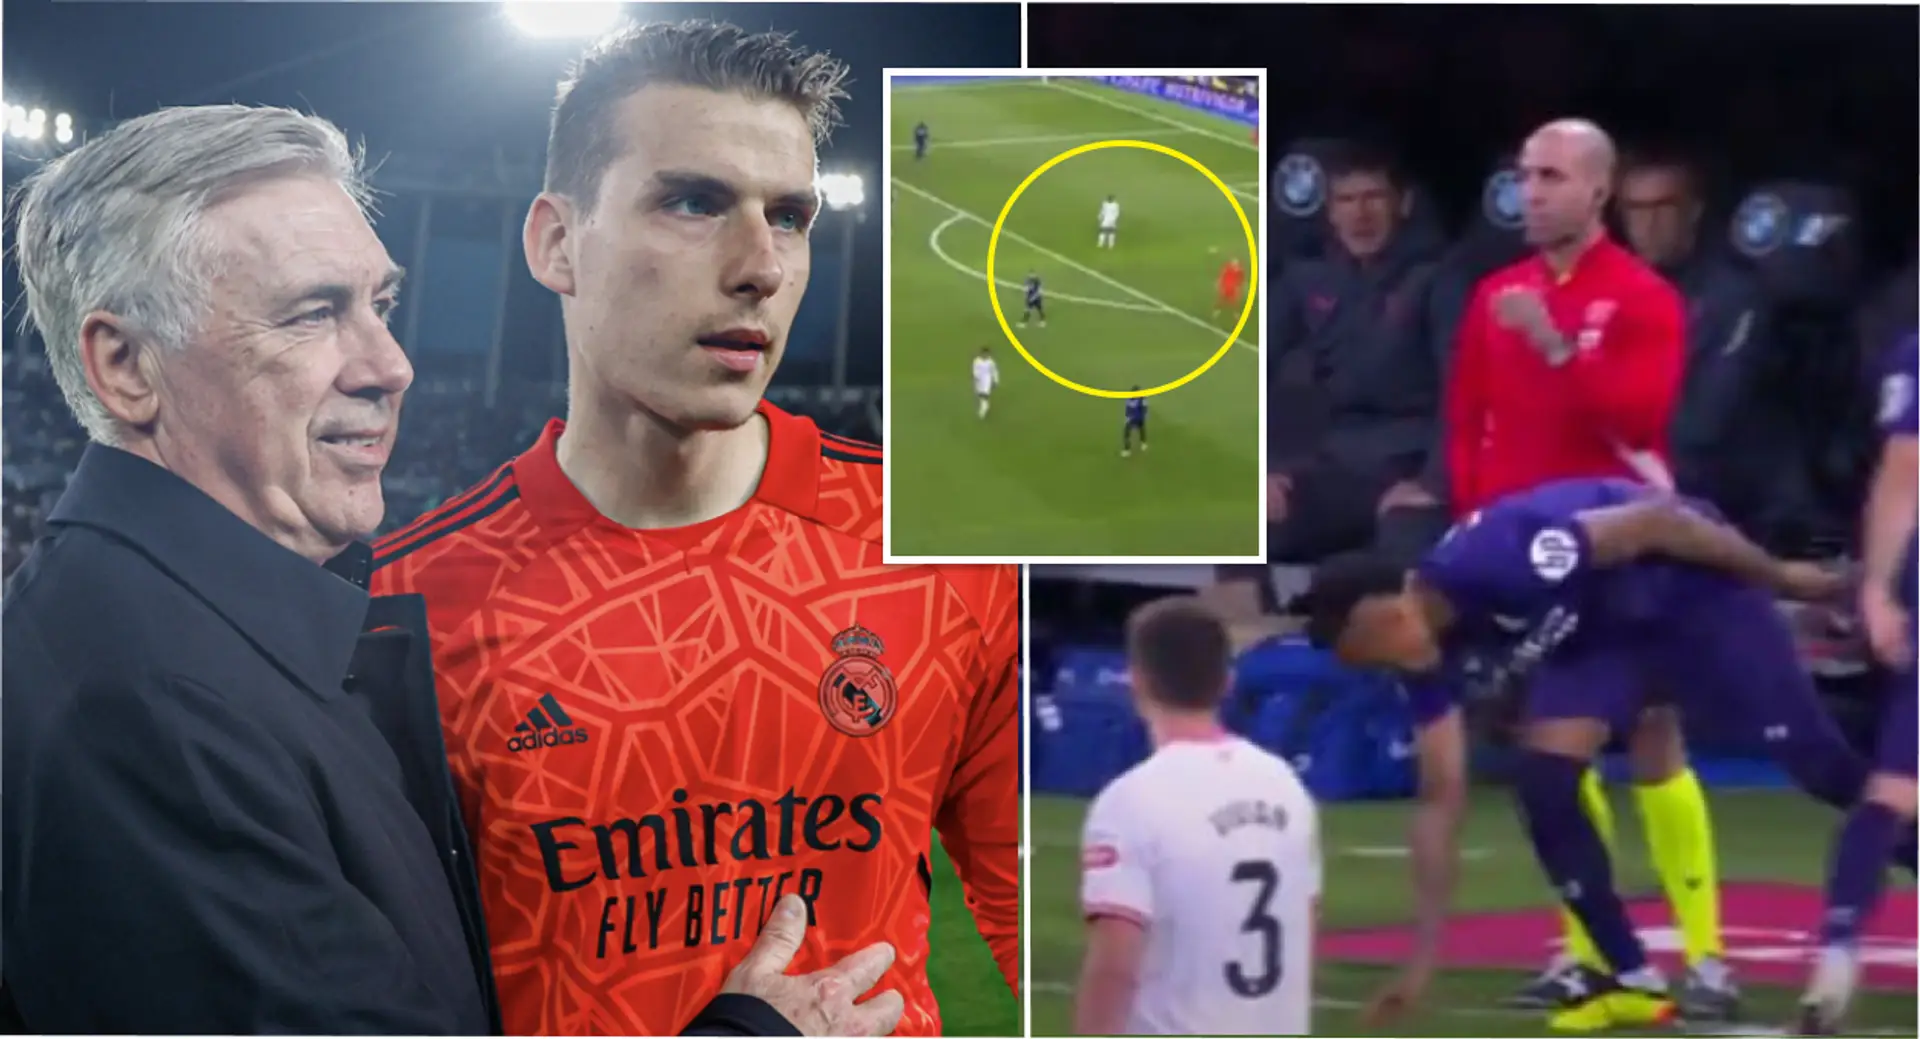 Lunin's beautiful gesture that allowed Militao to return in action v Bilbao caught on camera